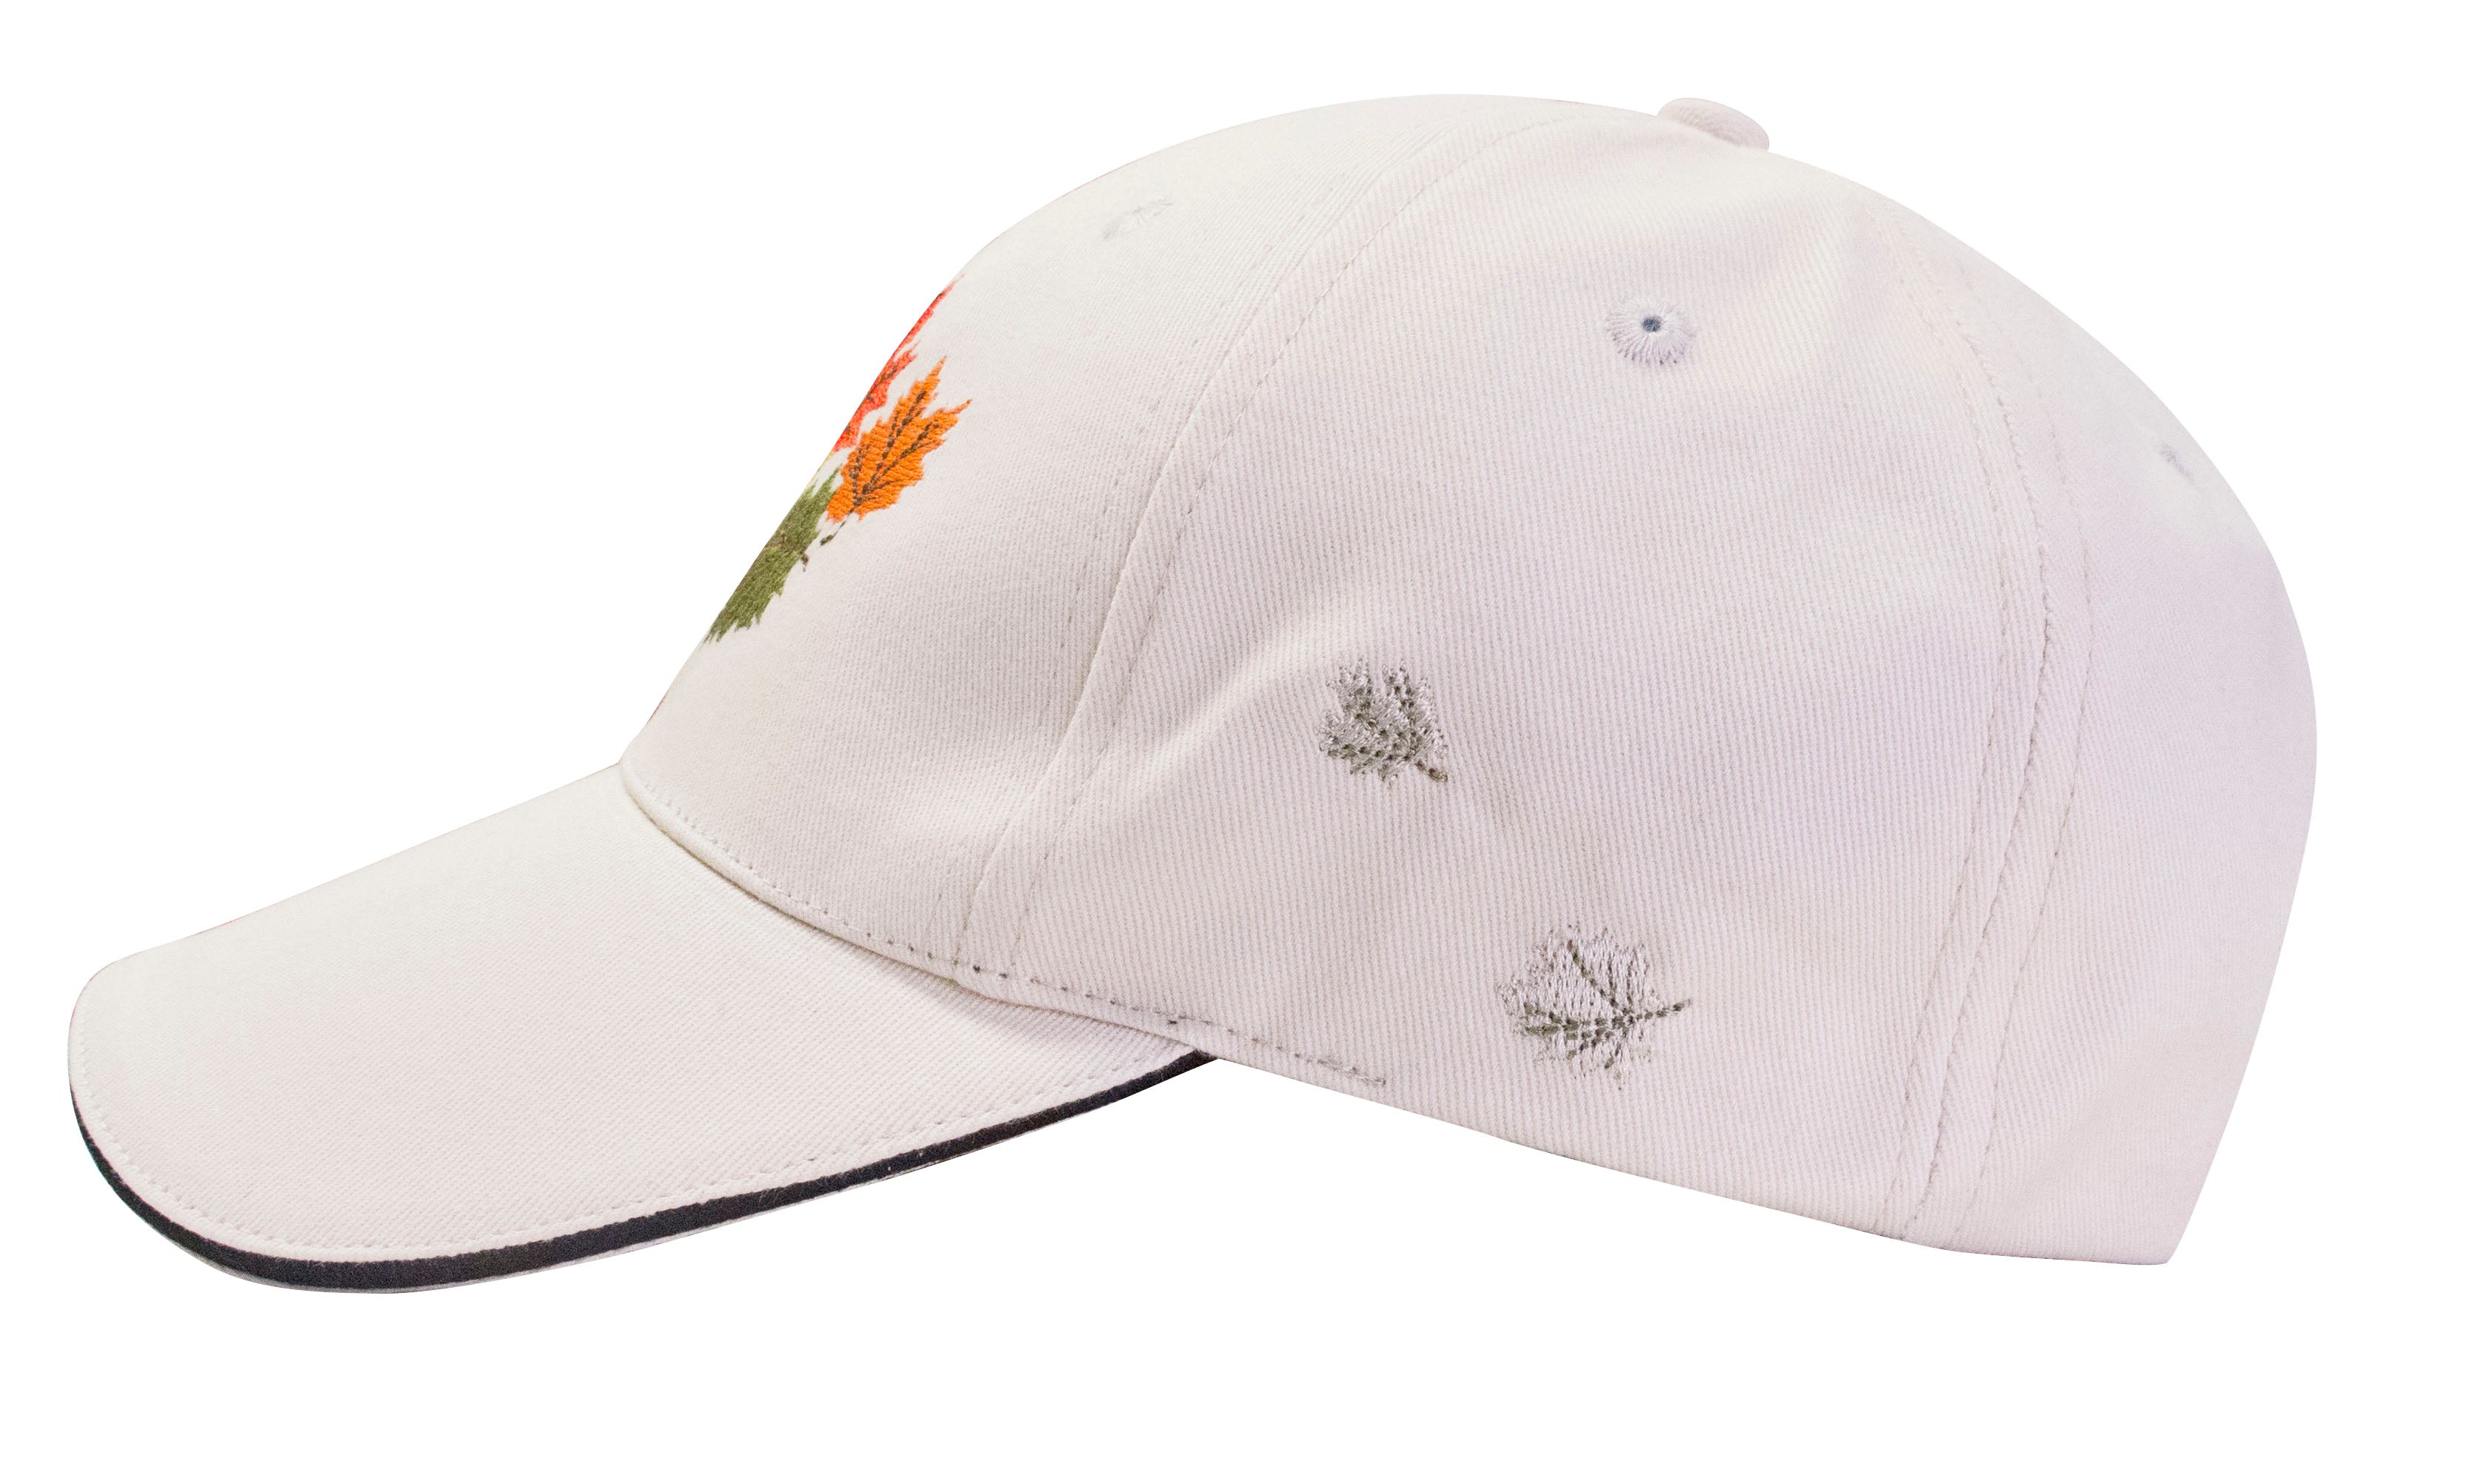 Ruth Lund Cluster Leaves Embroidered Baseball Cap